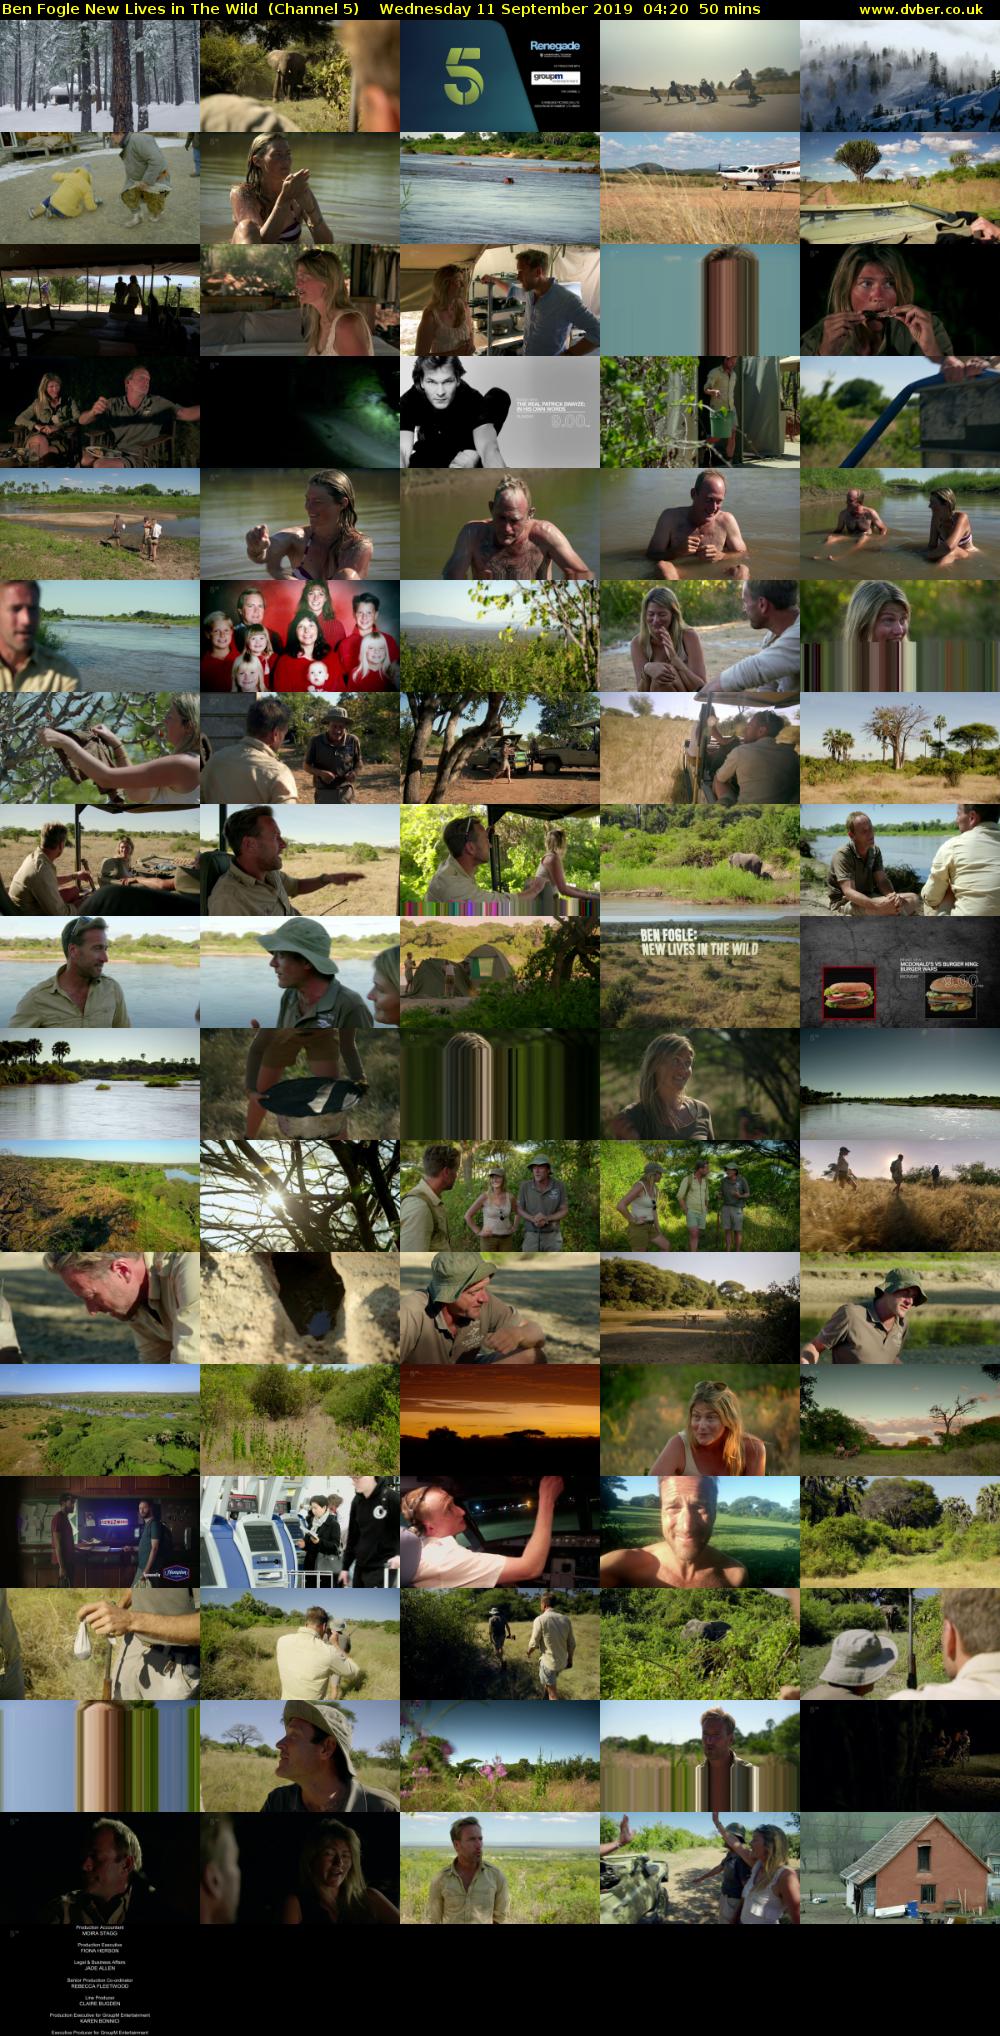 Ben Fogle New Lives in The Wild  (Channel 5) Wednesday 11 September 2019 04:20 - 05:10